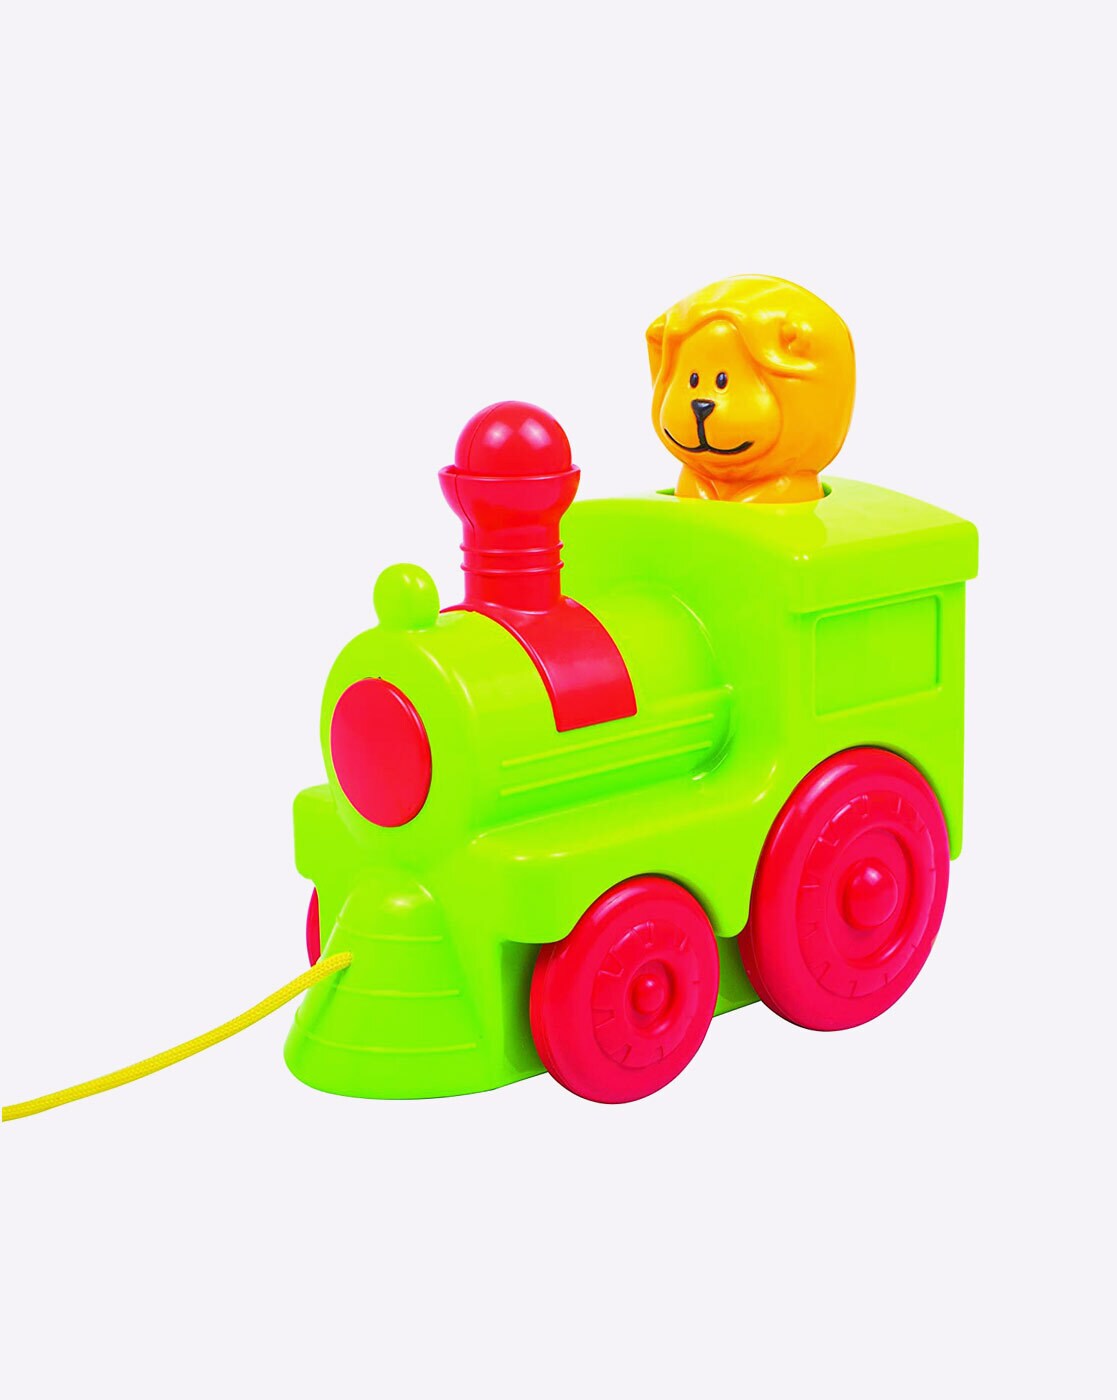 Buy　Baby　Giggles　Multicoloured　Gaming,　Online　Robots　Care　Vehicles　for　Toys　by